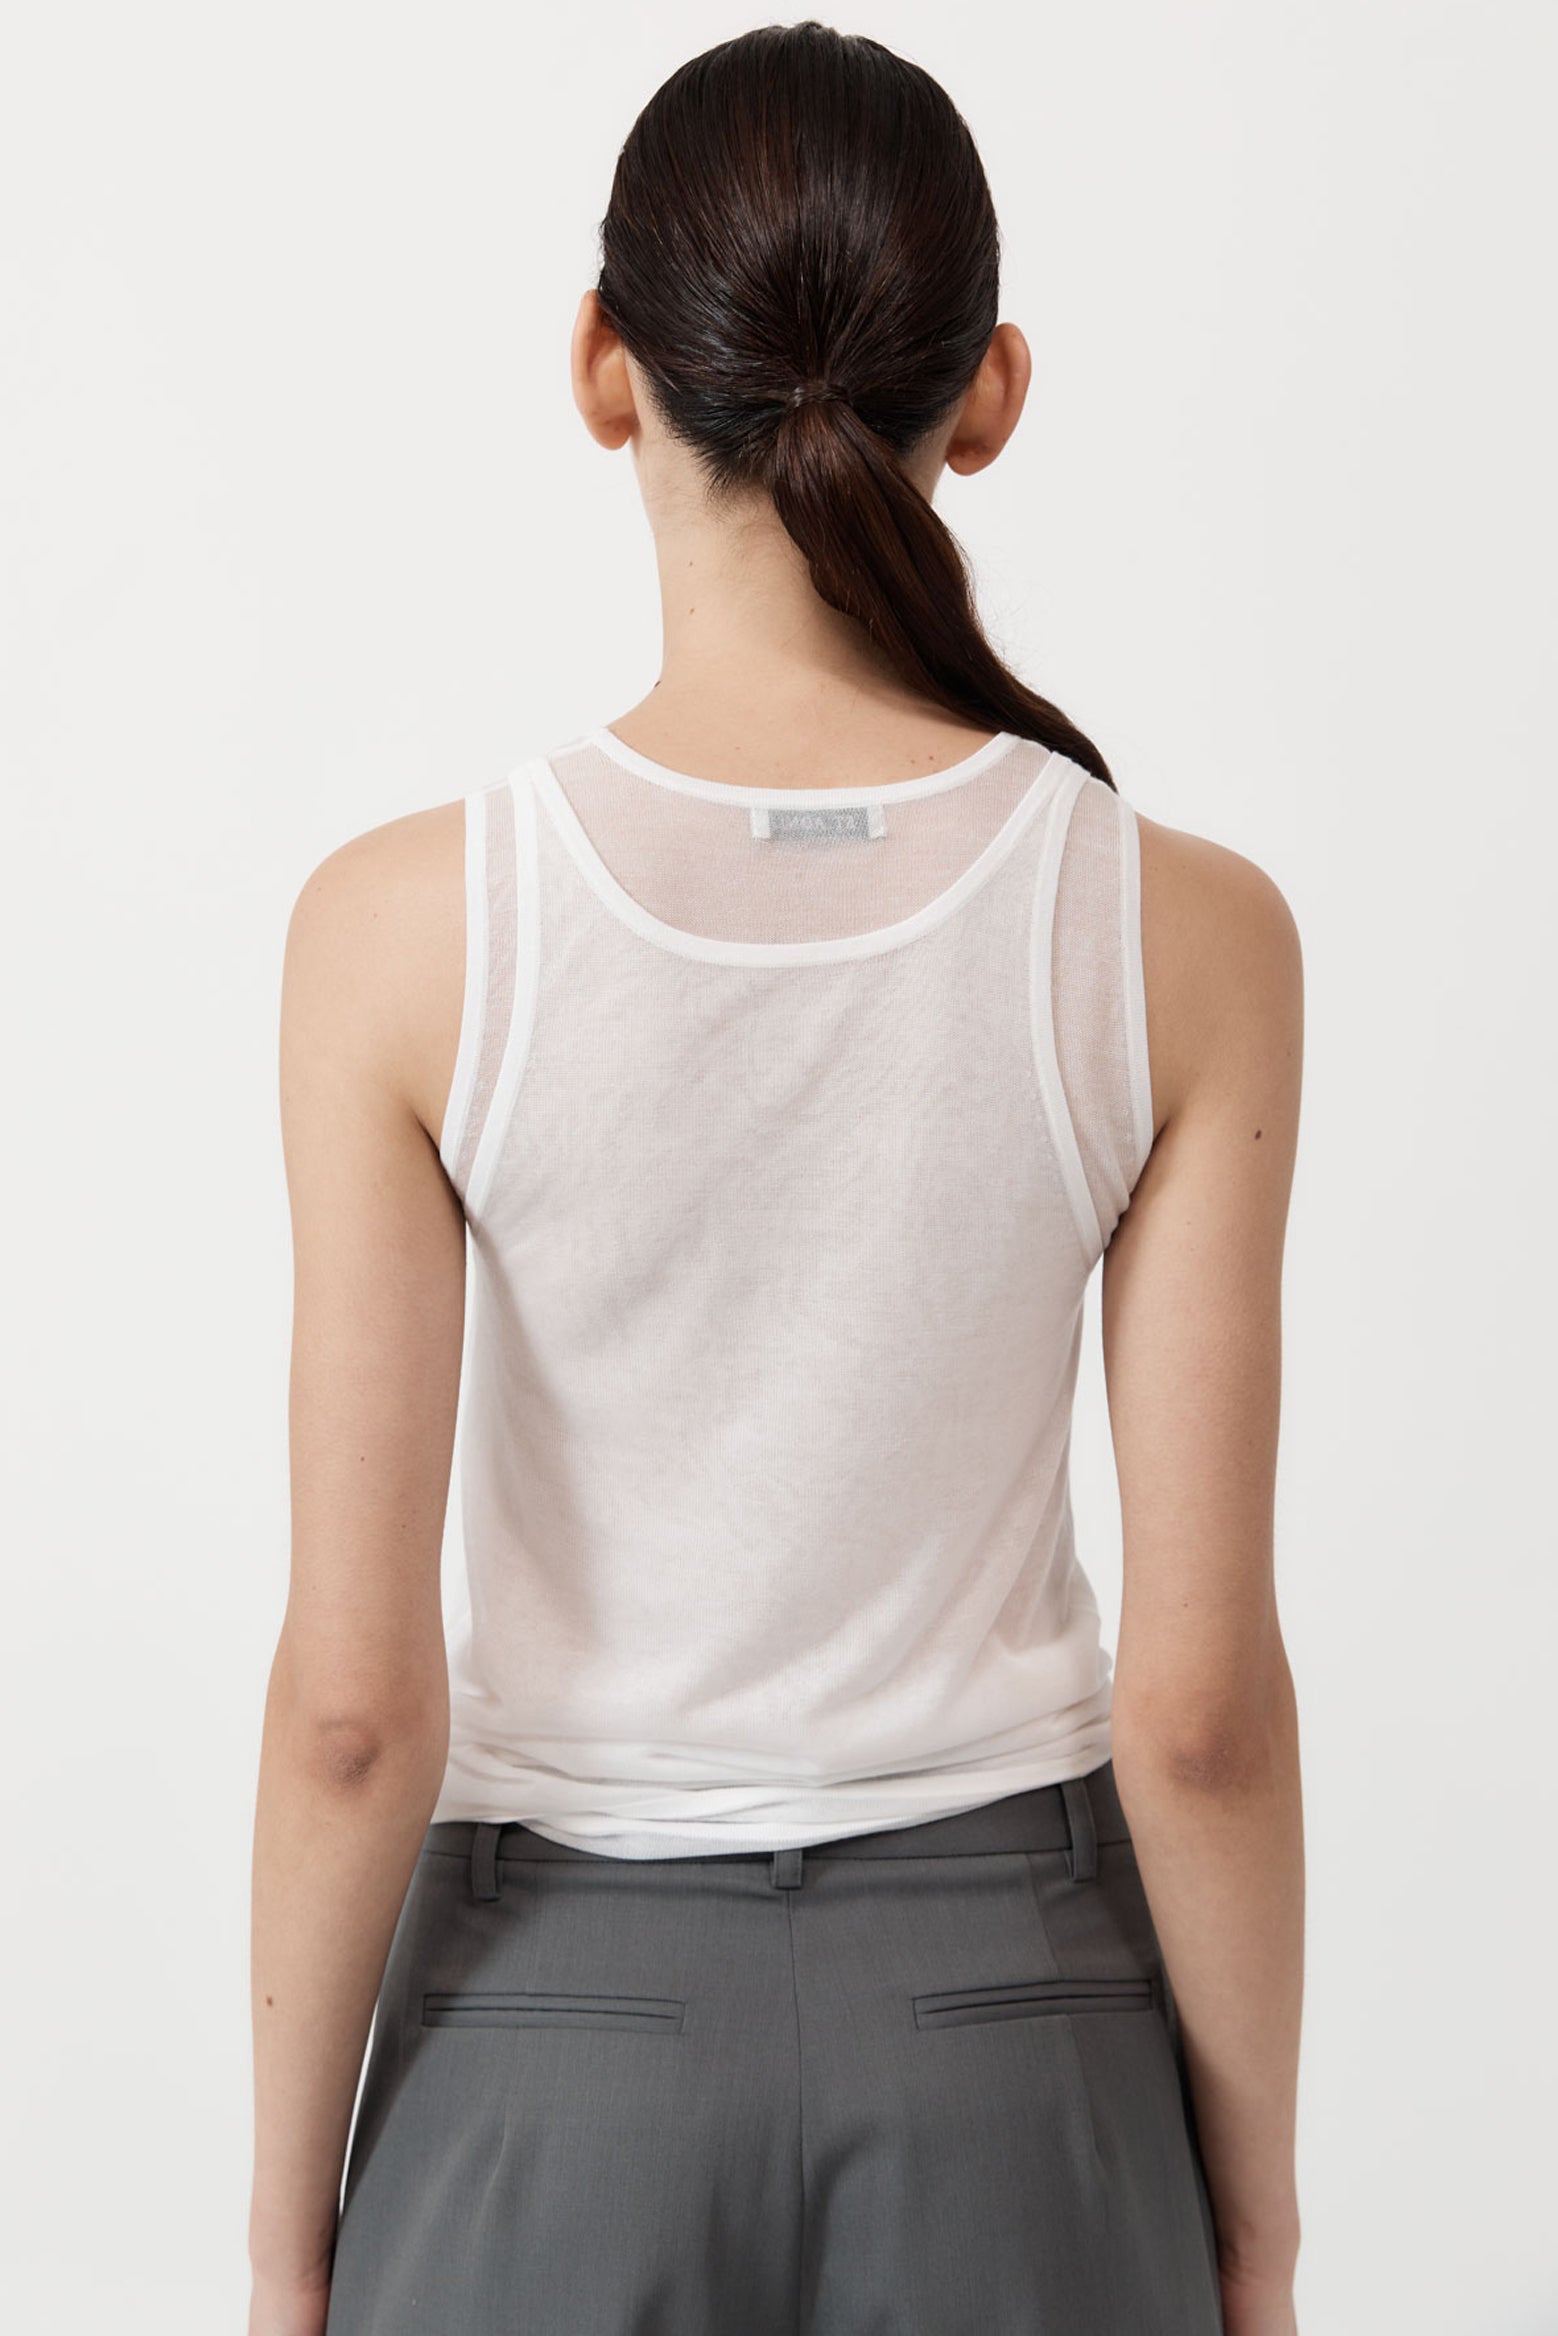 St Agni Semi Sheer Double Layered Tank in White available at The New Trend Australia.